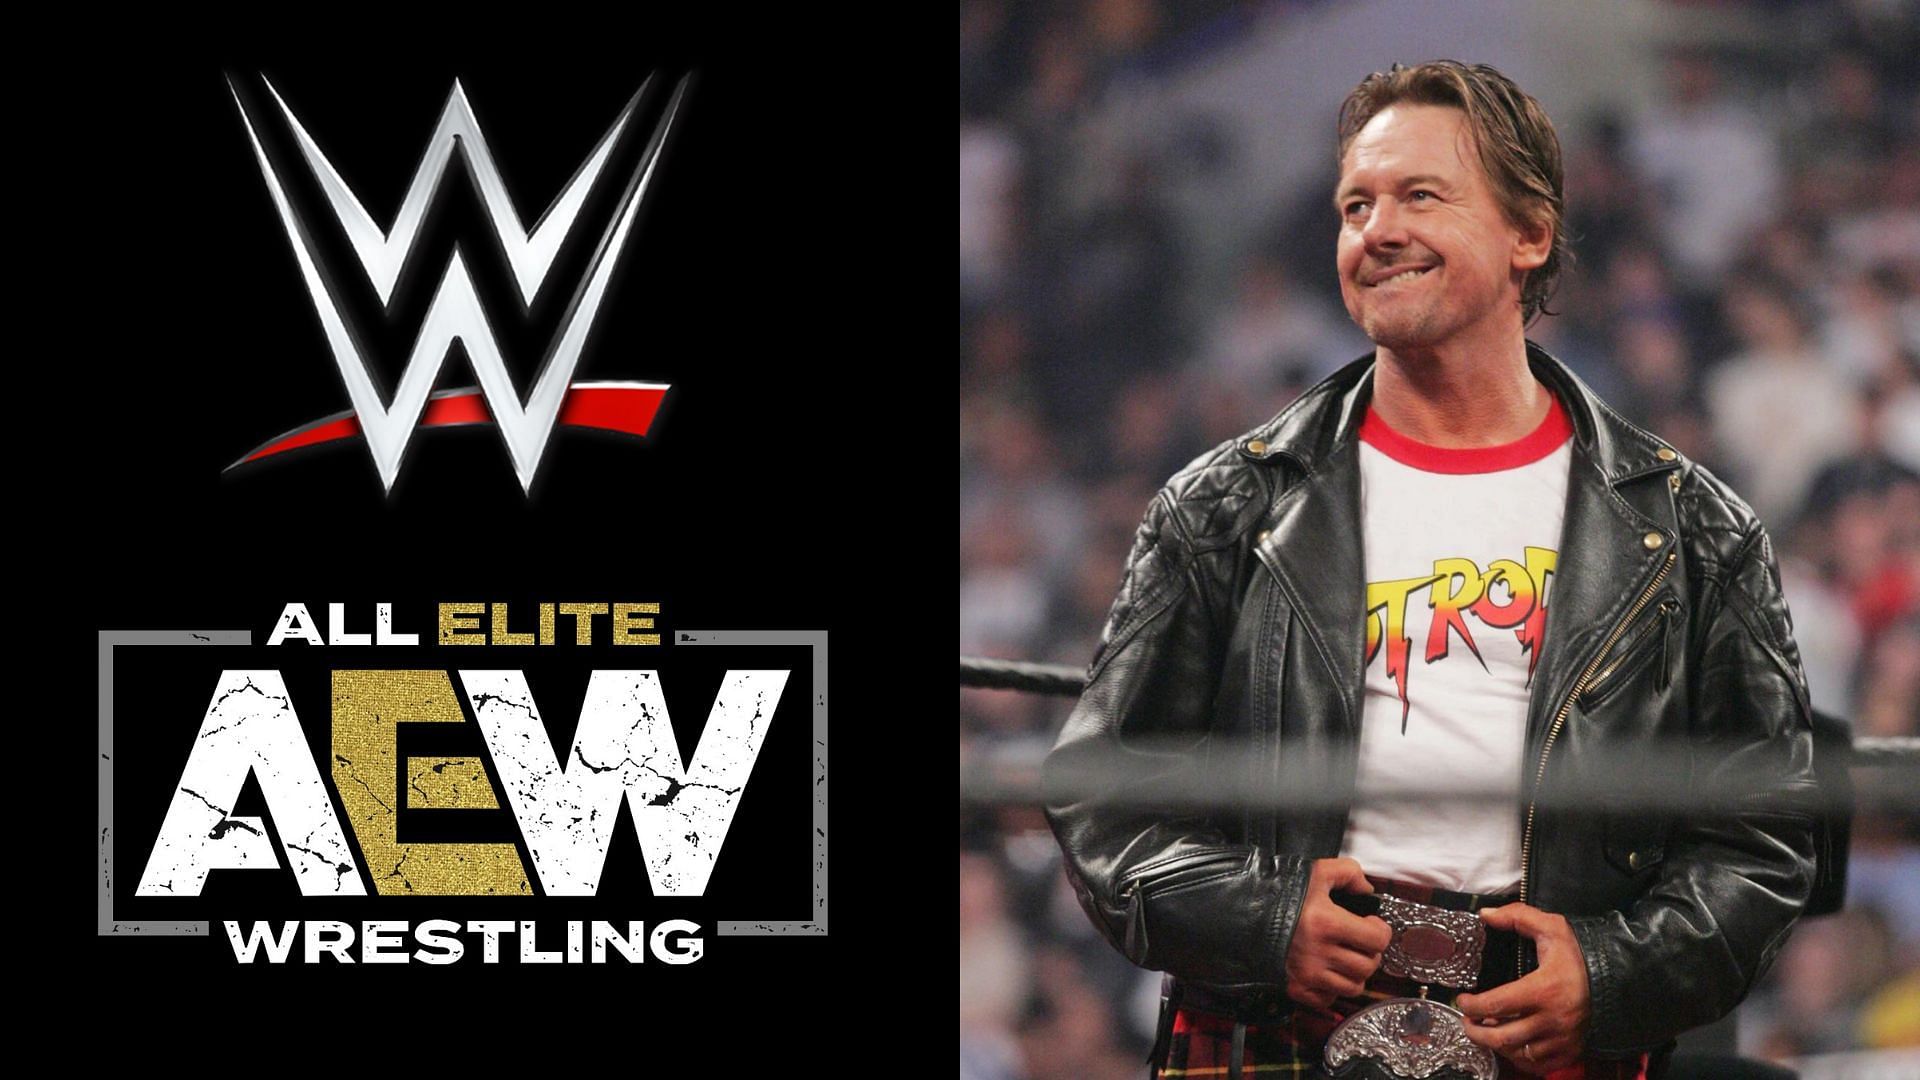 AEW and WWE logo (left), Roddy Piper (right)